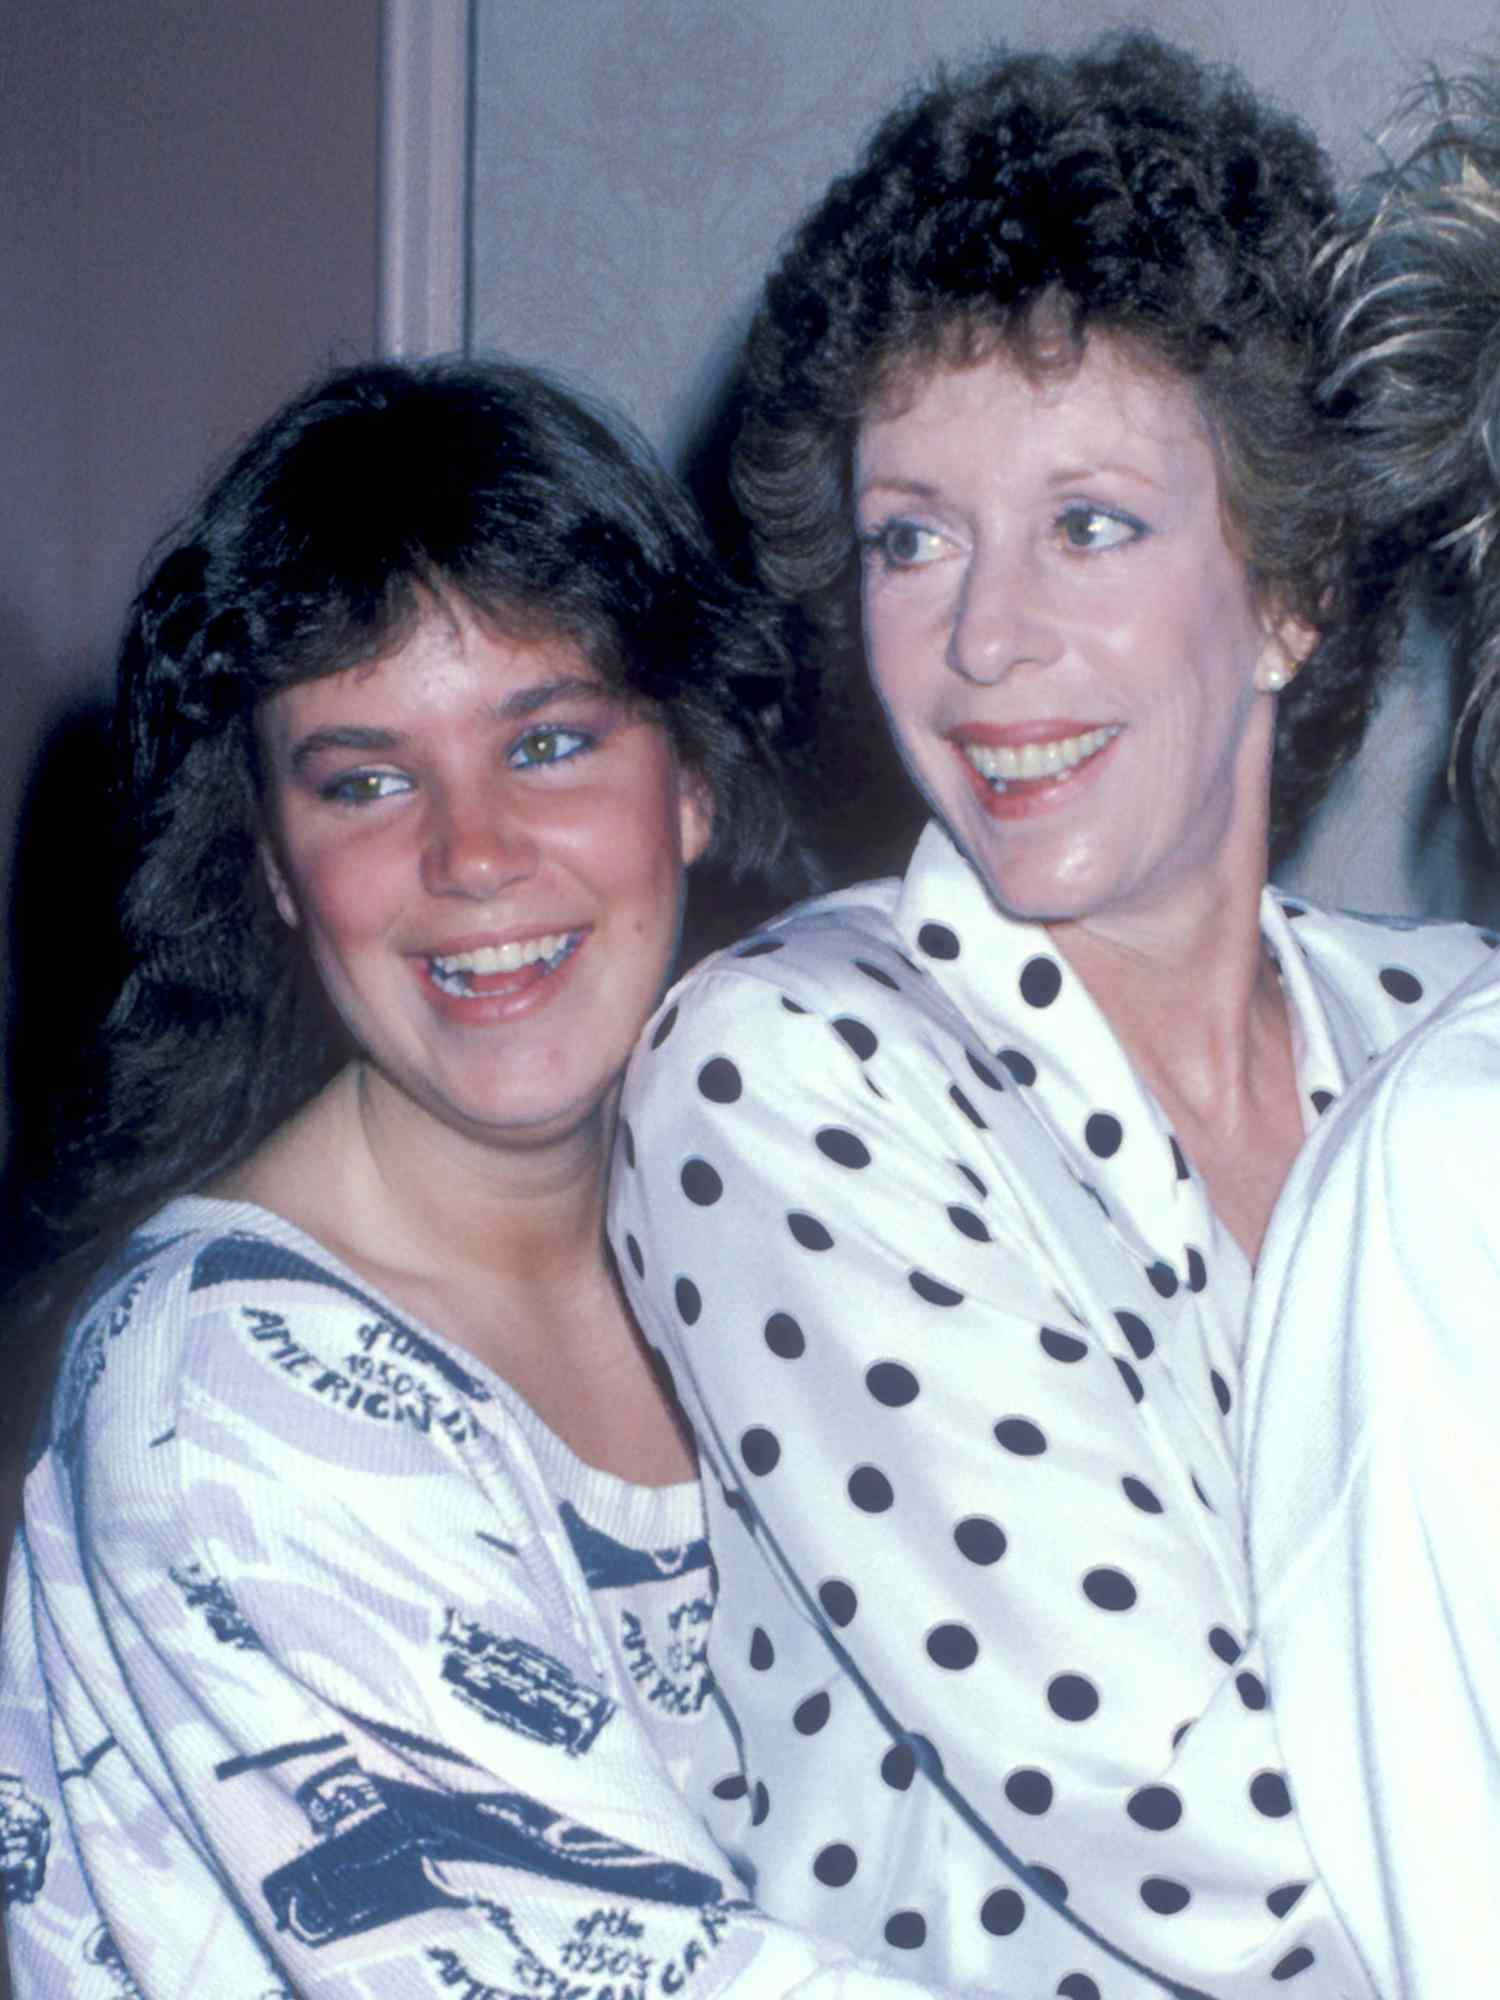 Jody Hamilton, Carol Burnett and Carrie Hamilton during 5th Annual Mother-Daughter Fashion Show - March 27, 1986 at Beverly Hilton Hotel in Beverly Hills, California, United States